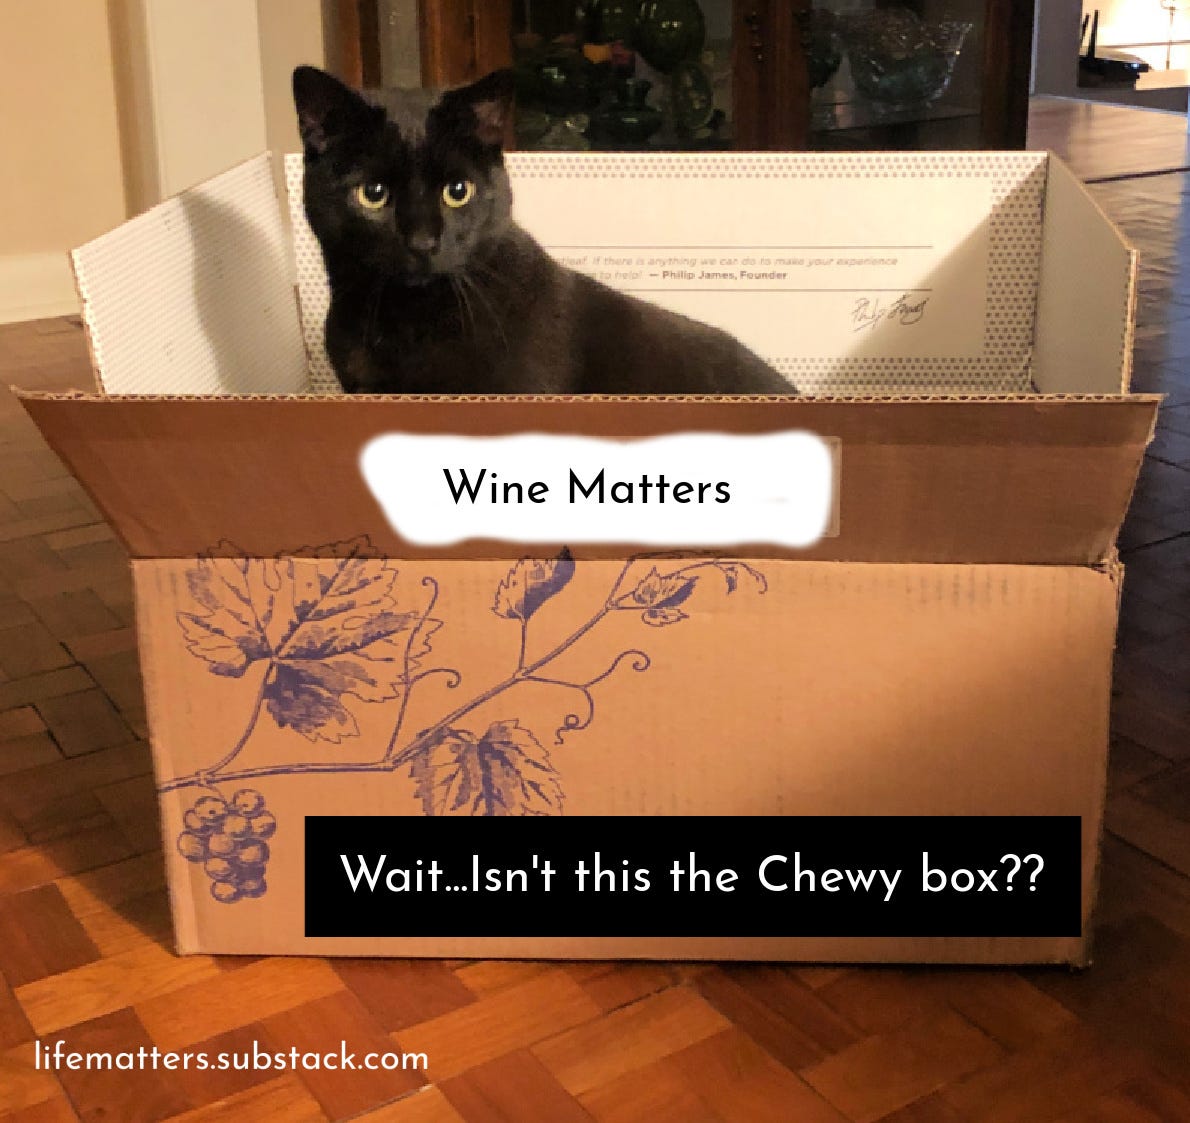 Black cat peeking out of 'Wine Matters' box with caption reading "Wait, Isn't this the Chewy box?"